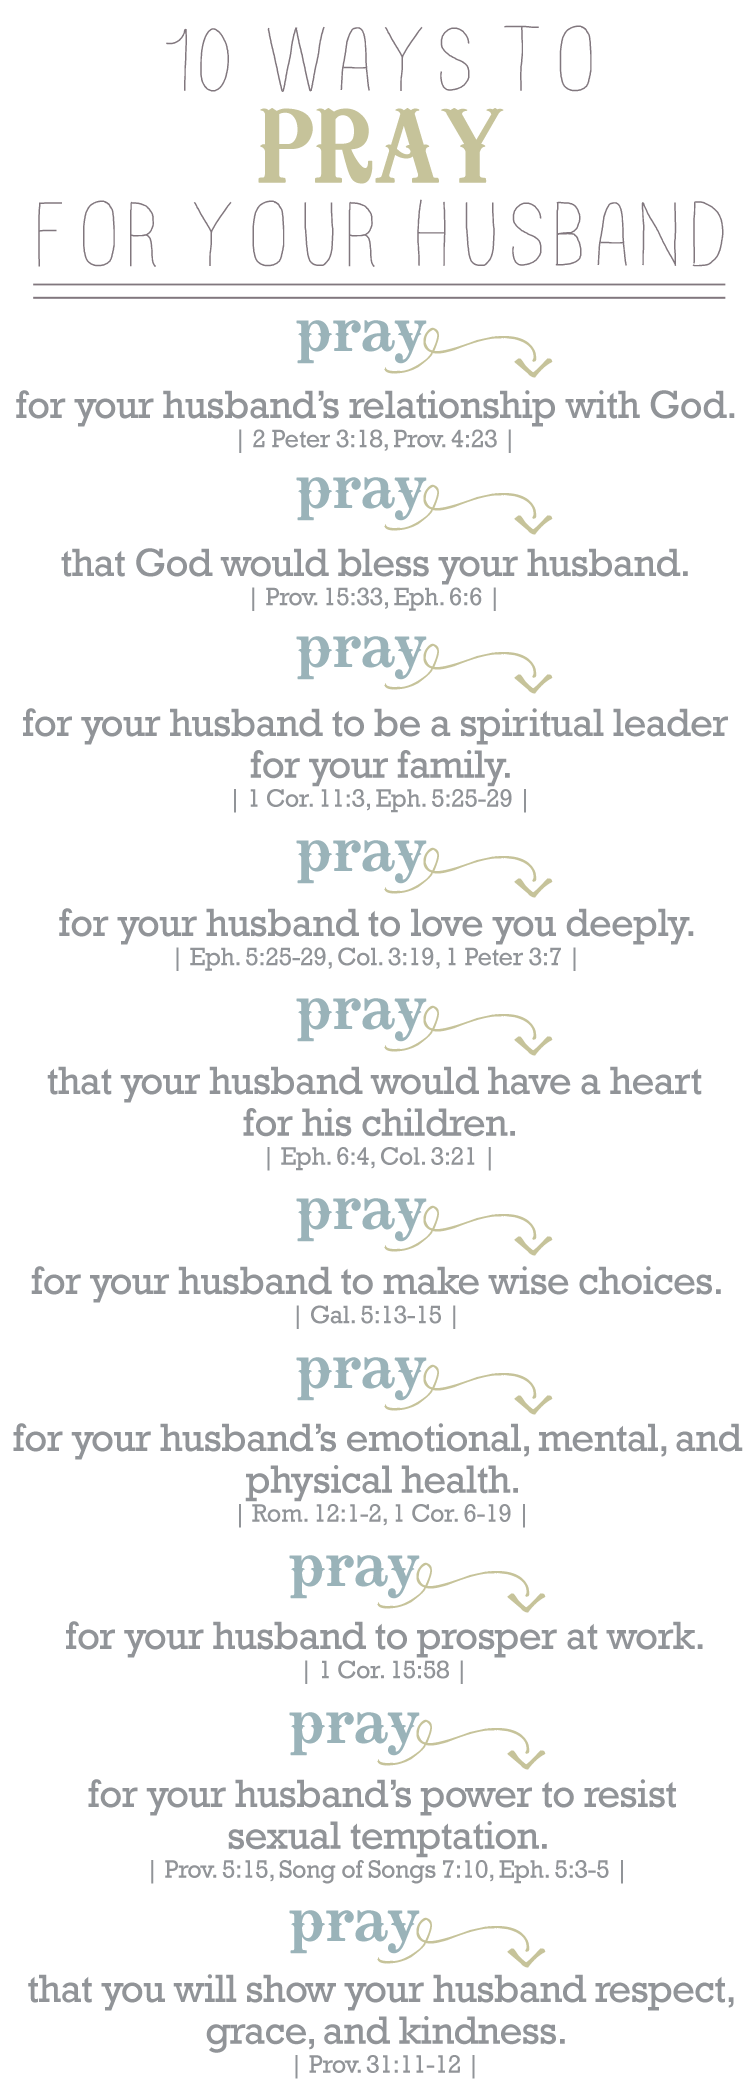 How to pray for your husband